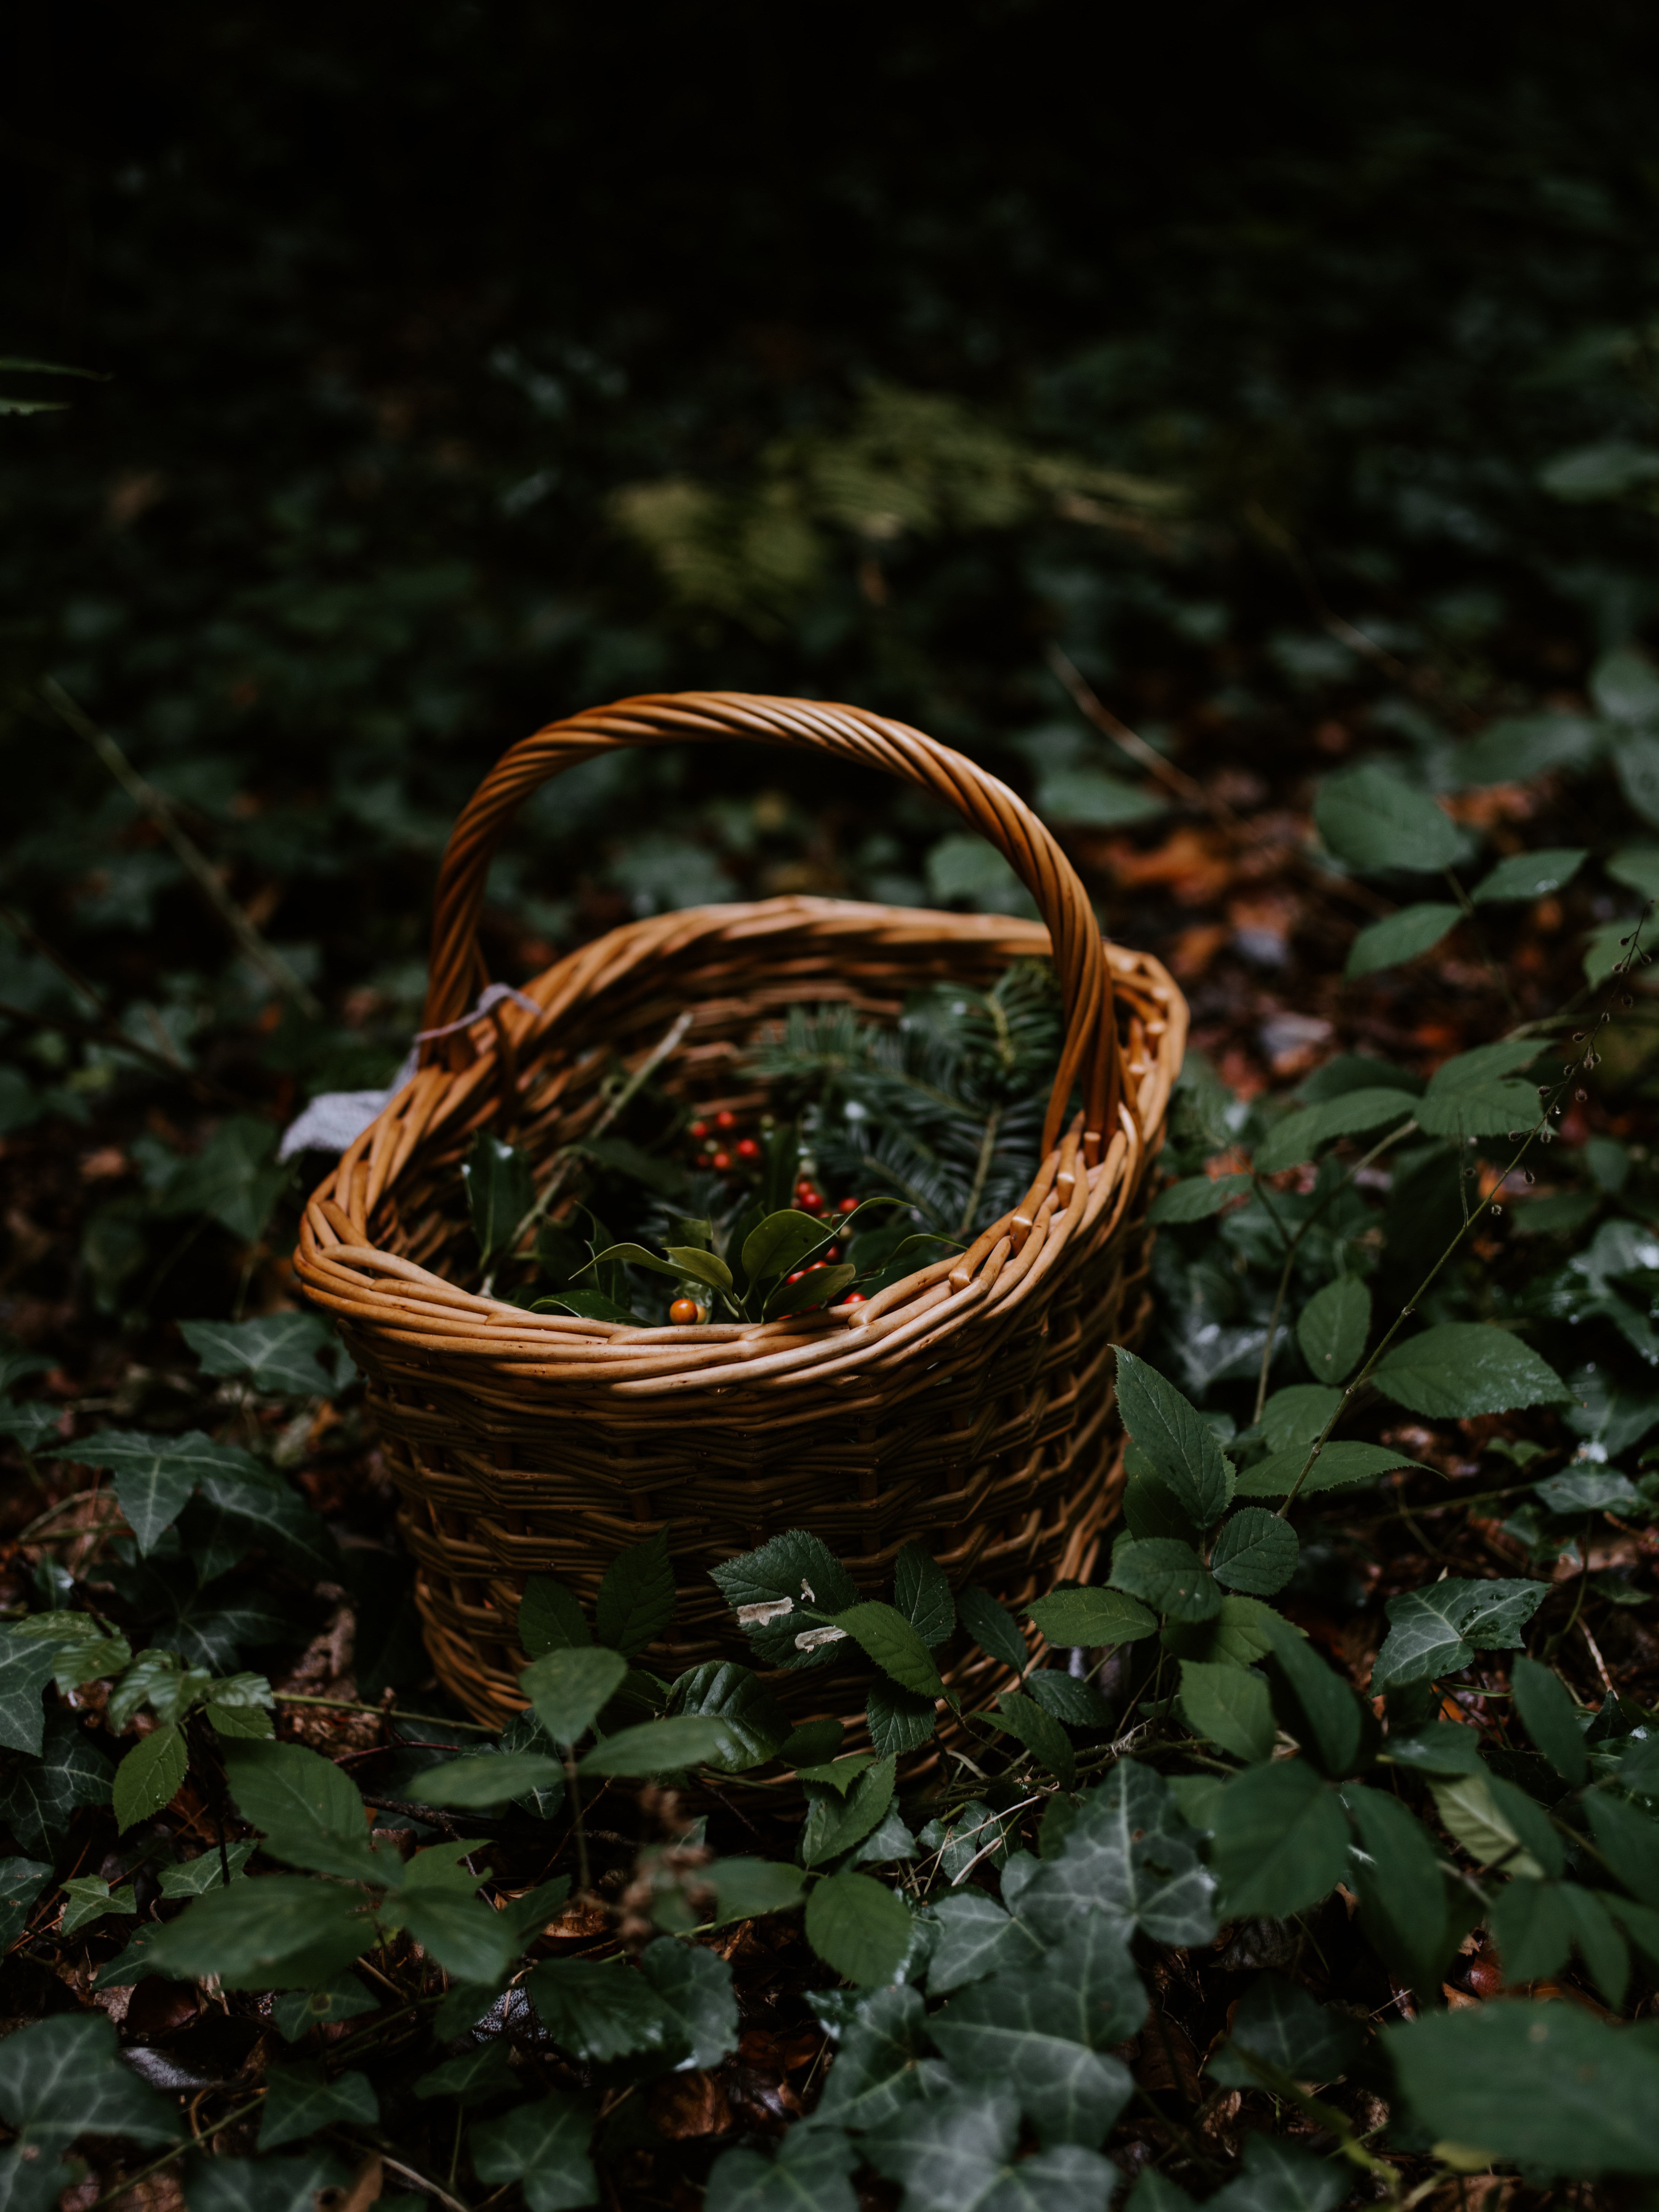 miscellaneous, nature, berries, miscellanea, branches, basket, wicker, braided